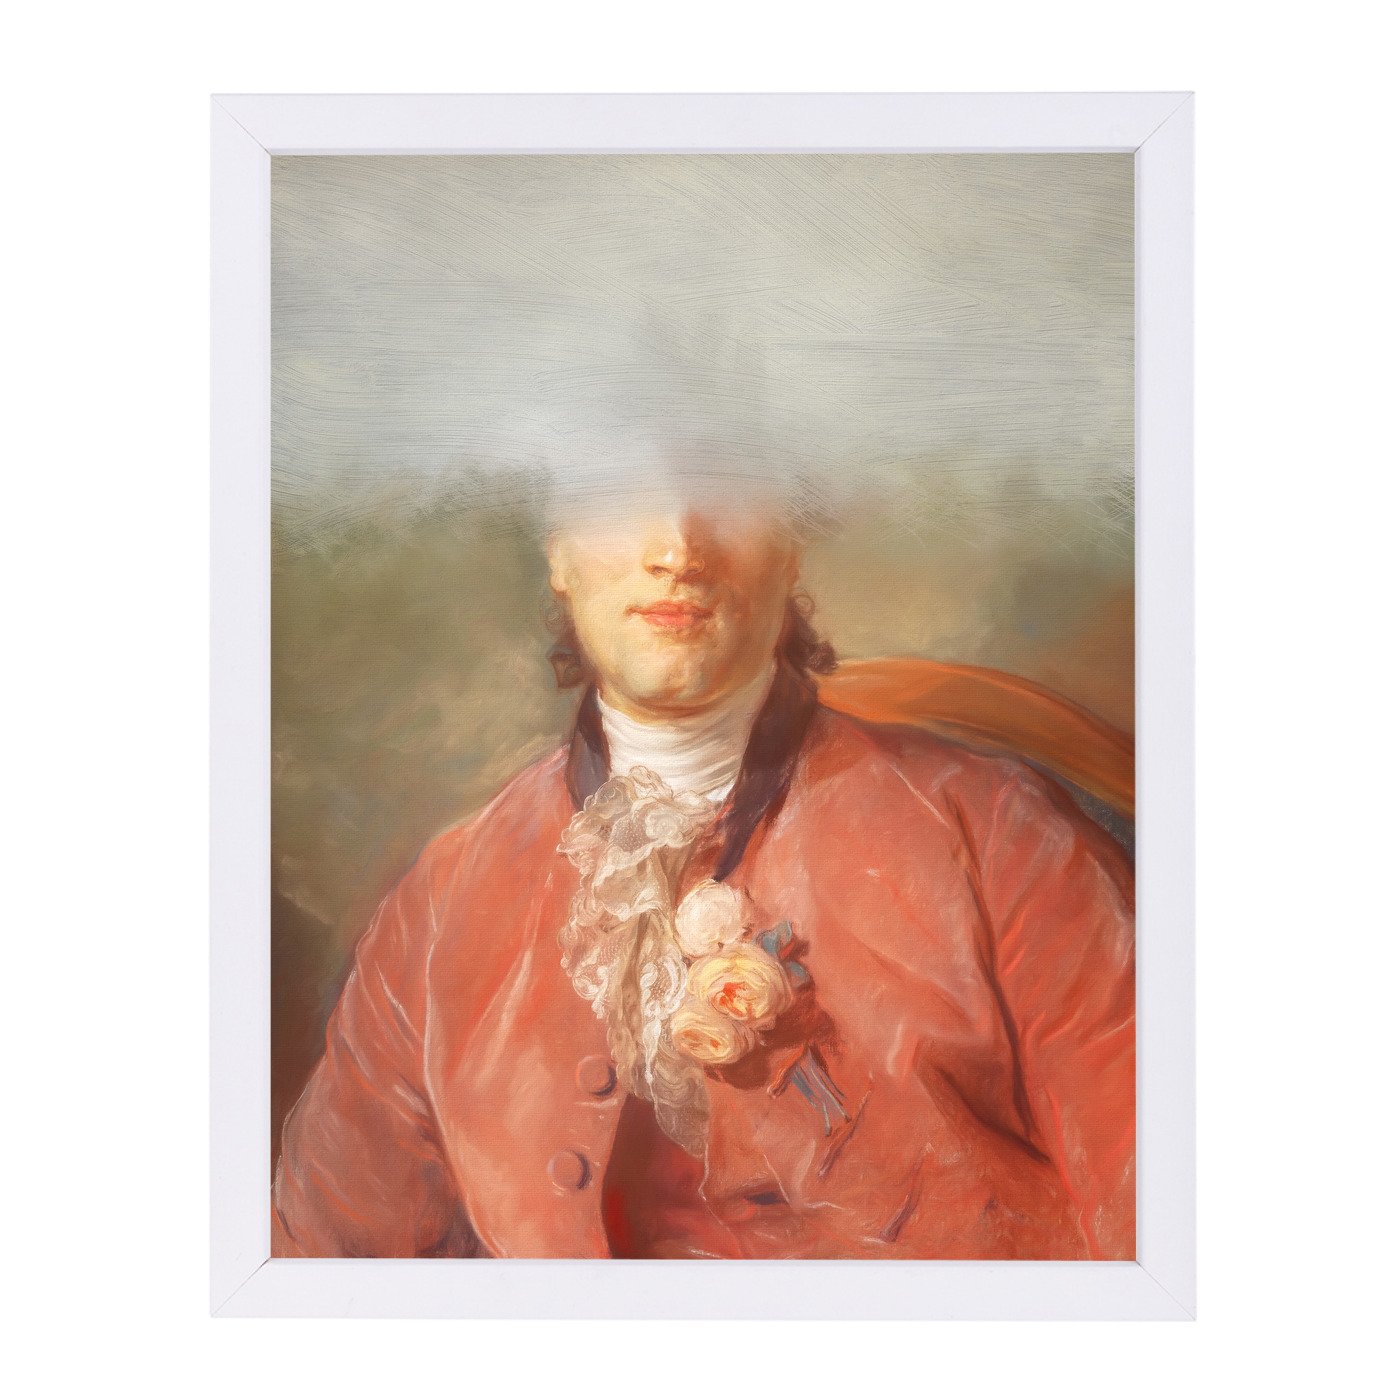 The Frenchman By Chaos & Wonder Design - Framed Print - Americanflat